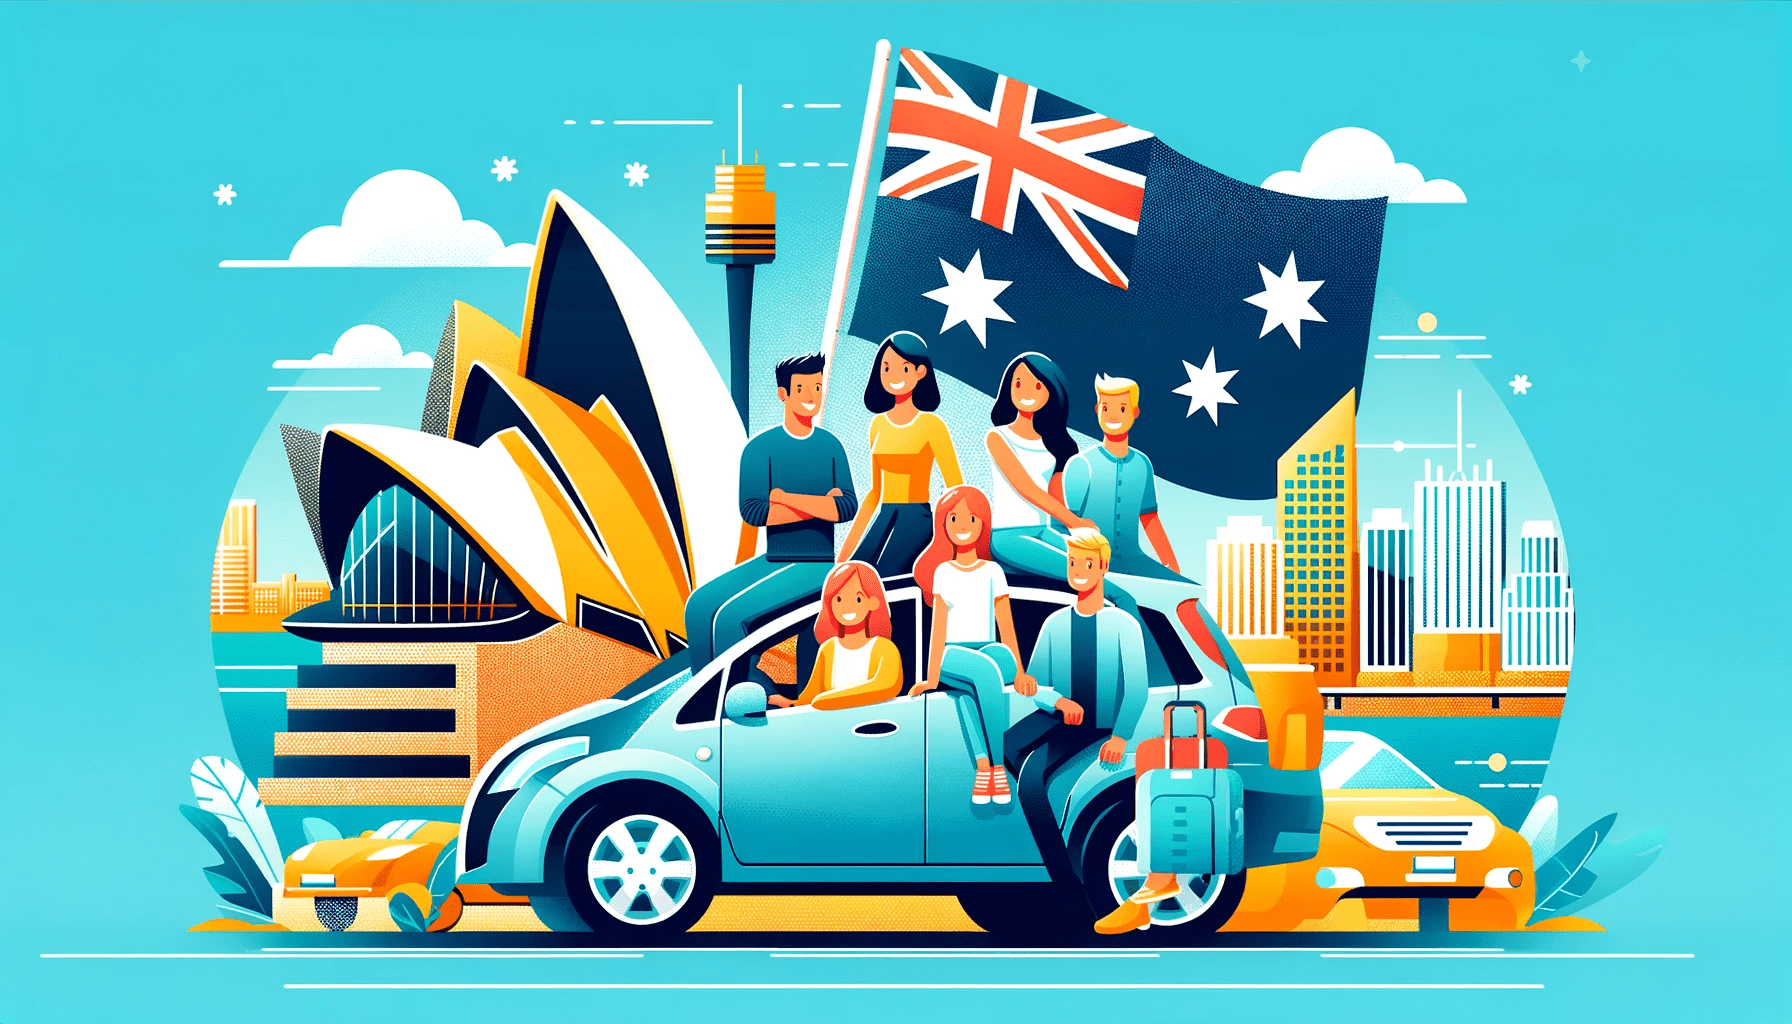 Cover for article called "The Ultimate Guide to Carpooling in Australia with Moovl: Benefits, Tips, and Safety"